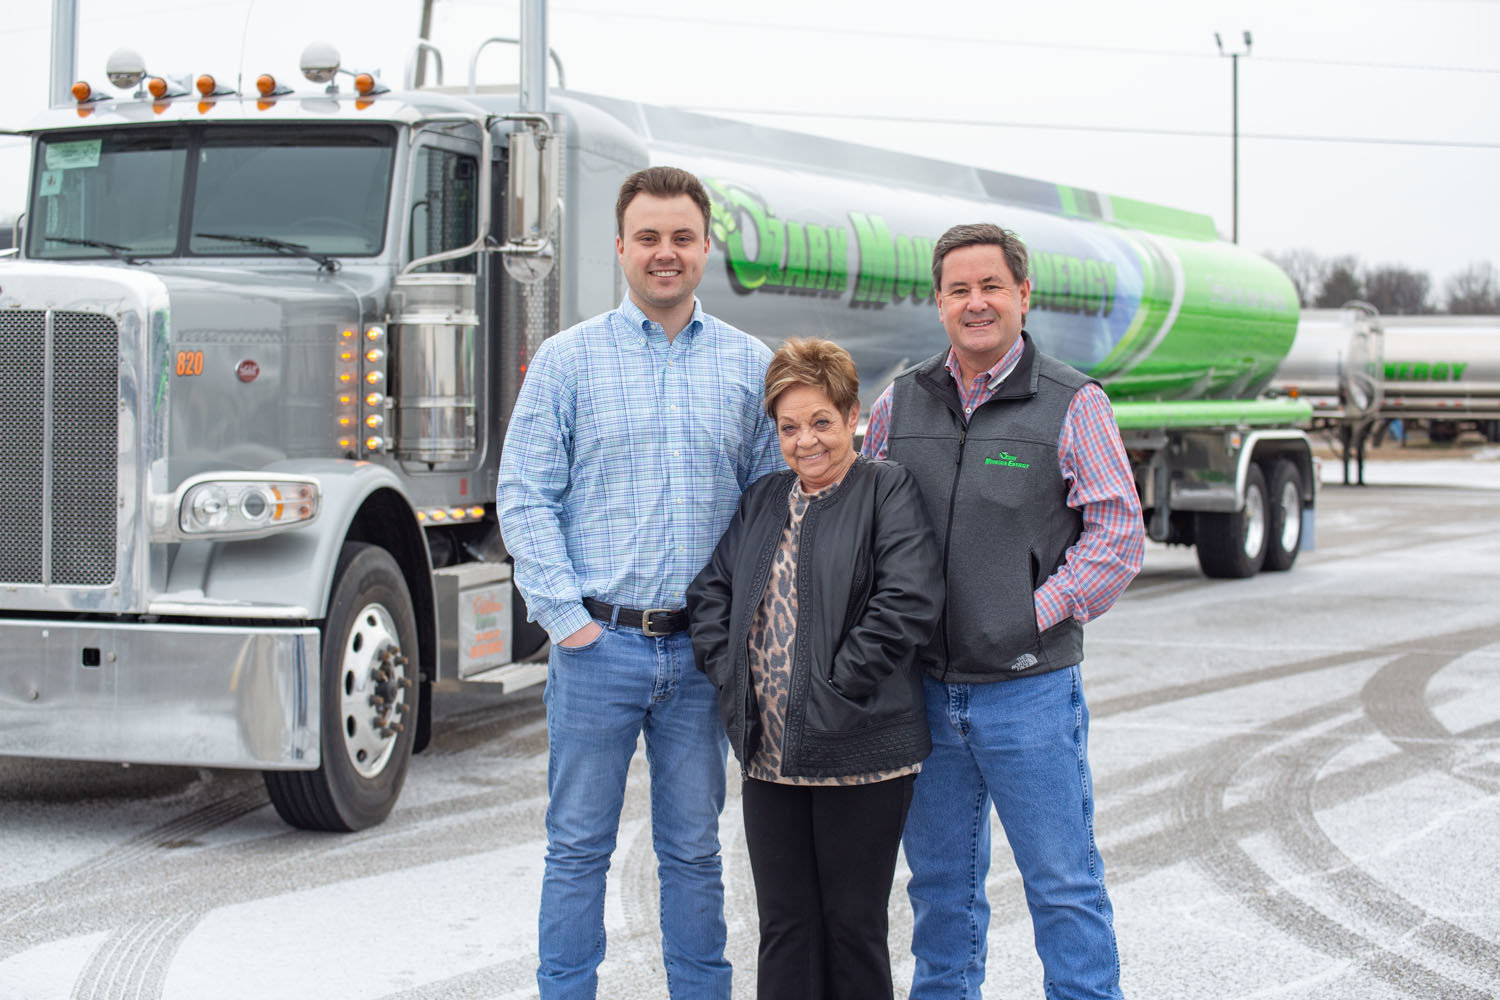 ENERGIZED EXPANSION: Owner Brent Wilmoth, far right, and son Eric, left, operate a wholesale fuel supply company in Mount Vernon that’s grown fivefold since 2015 with Chief Financial Officer Kay Jeffery.